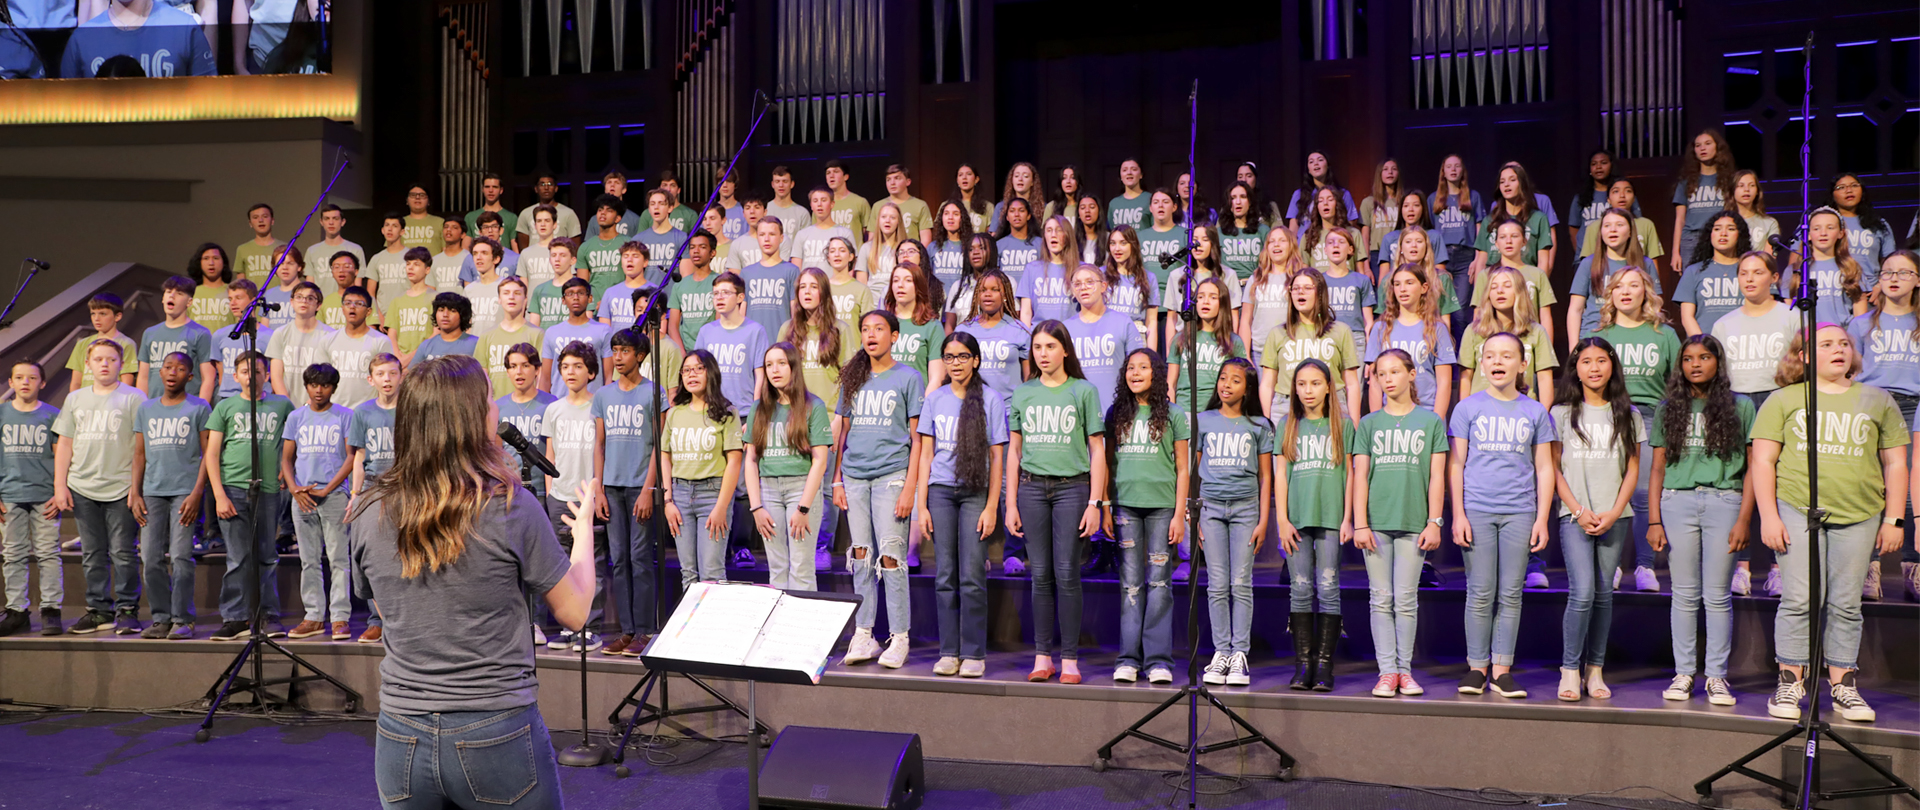 Student Worship Ministry
Choir, Band, One Voice, & Orchestra
